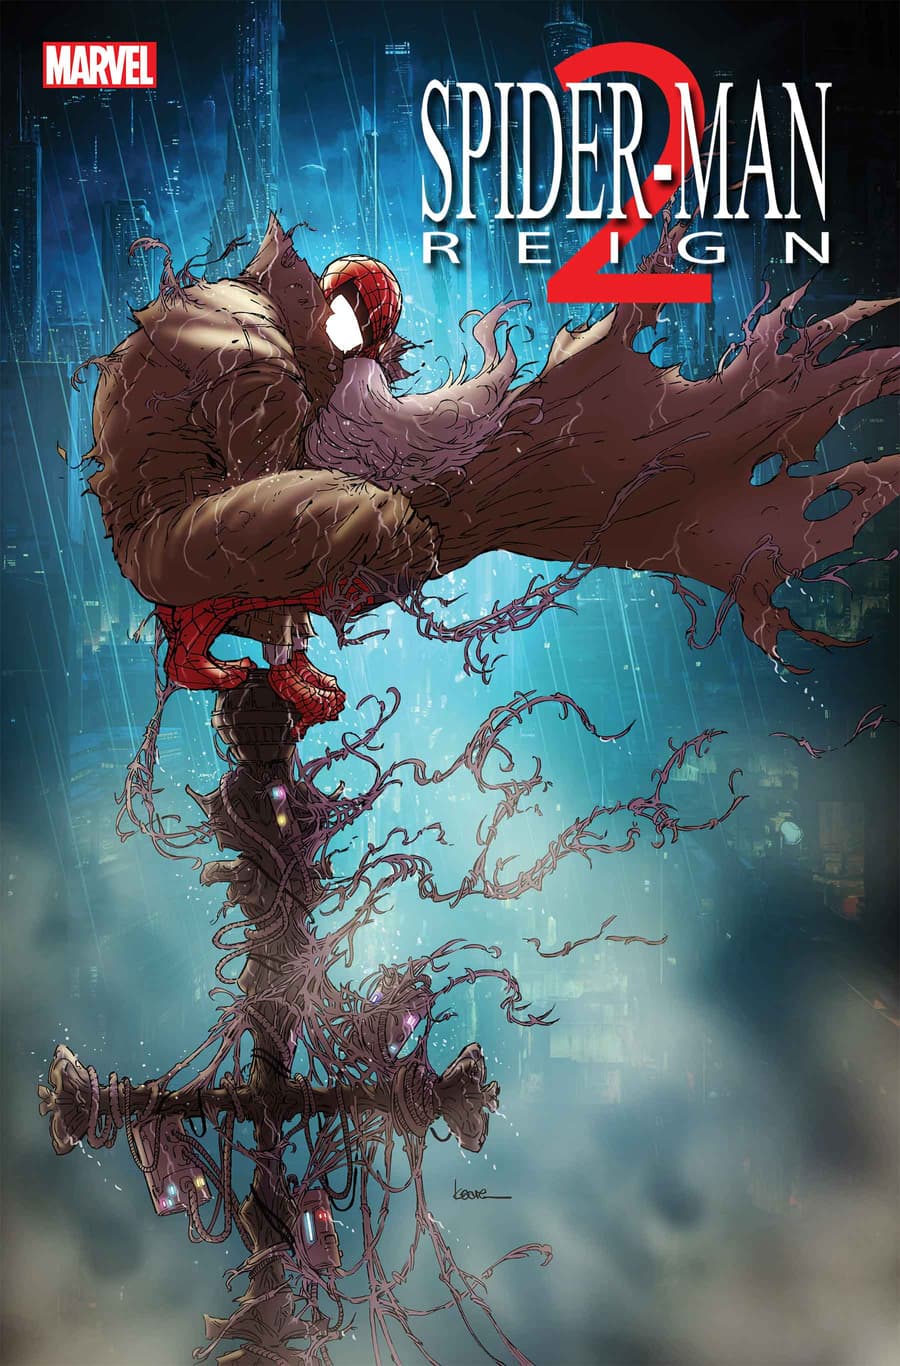 SPIDER-MAN: REIGN II #1 cover by Kaare Andrews